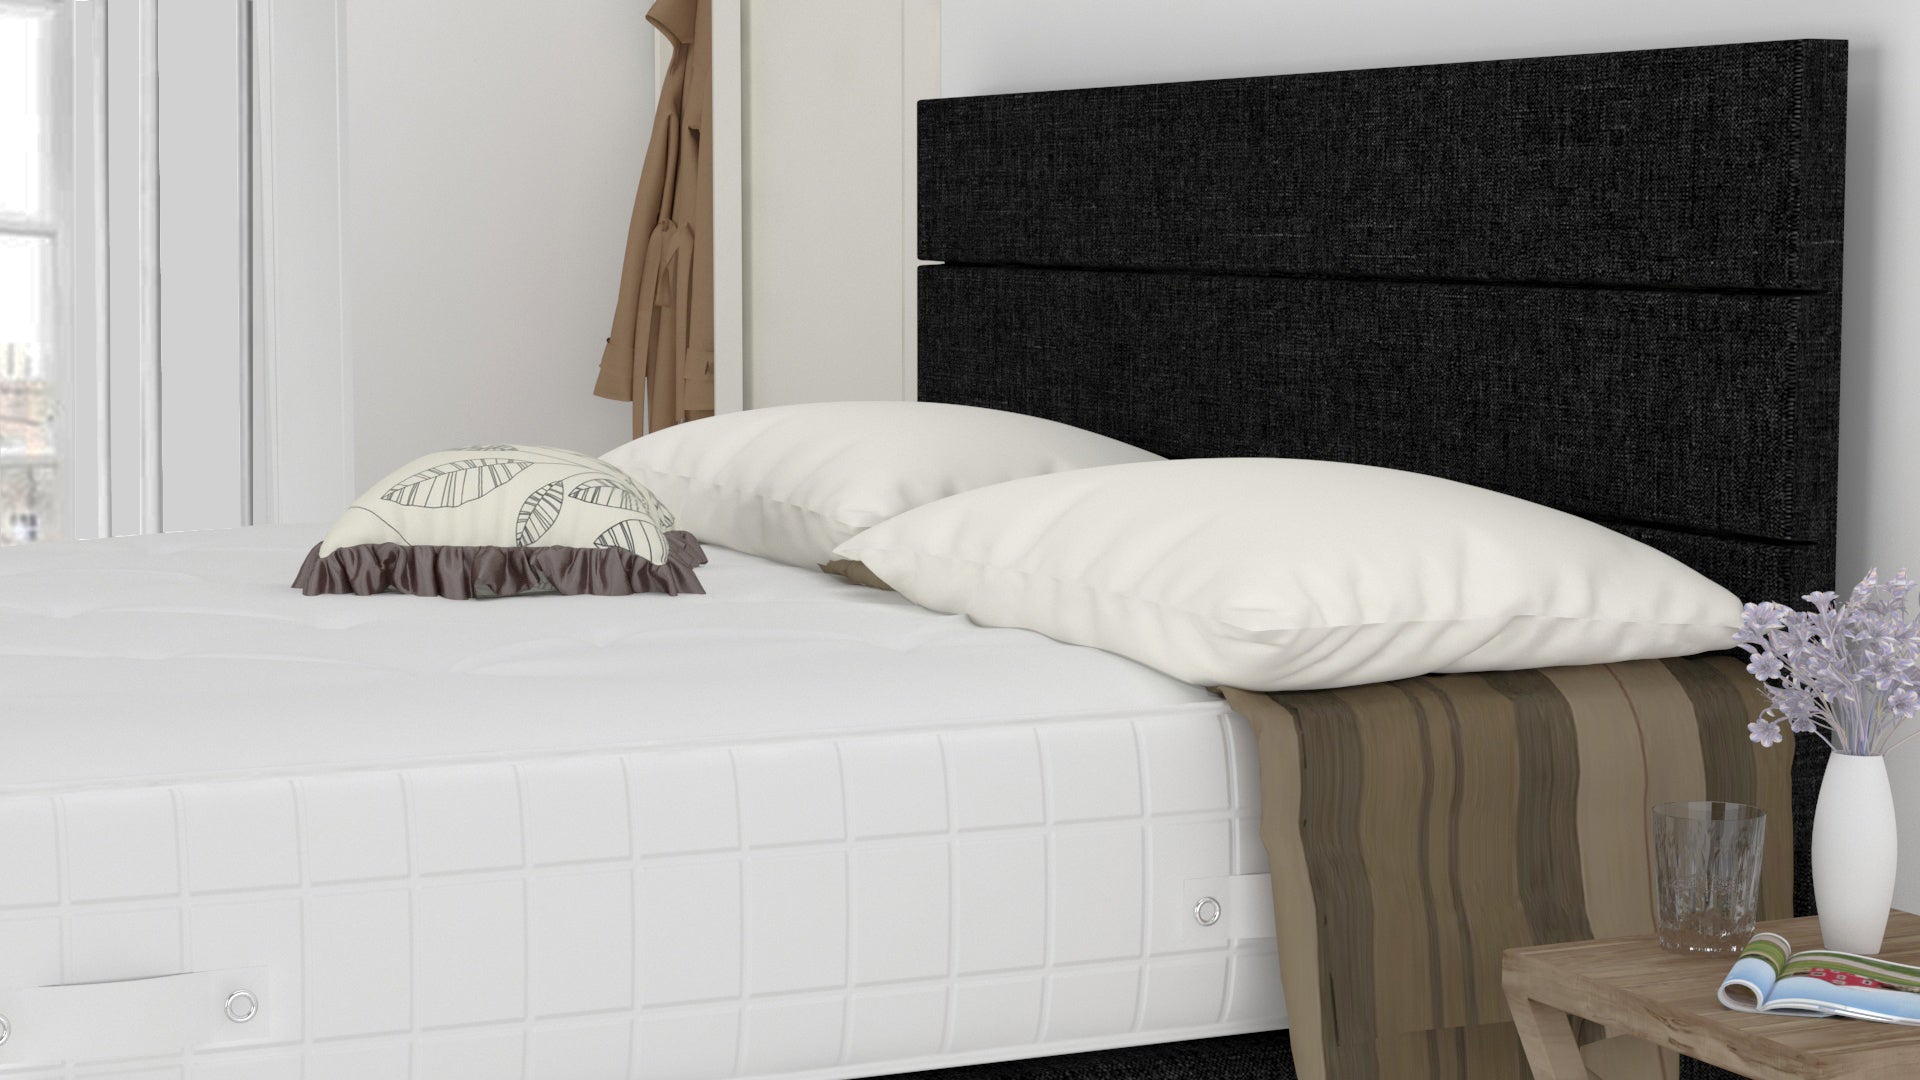 Black Venice 3 Feet Divan Bed Set With 3 Panel Headboard (Included Feet) And Free Pocket Sprung Mattress